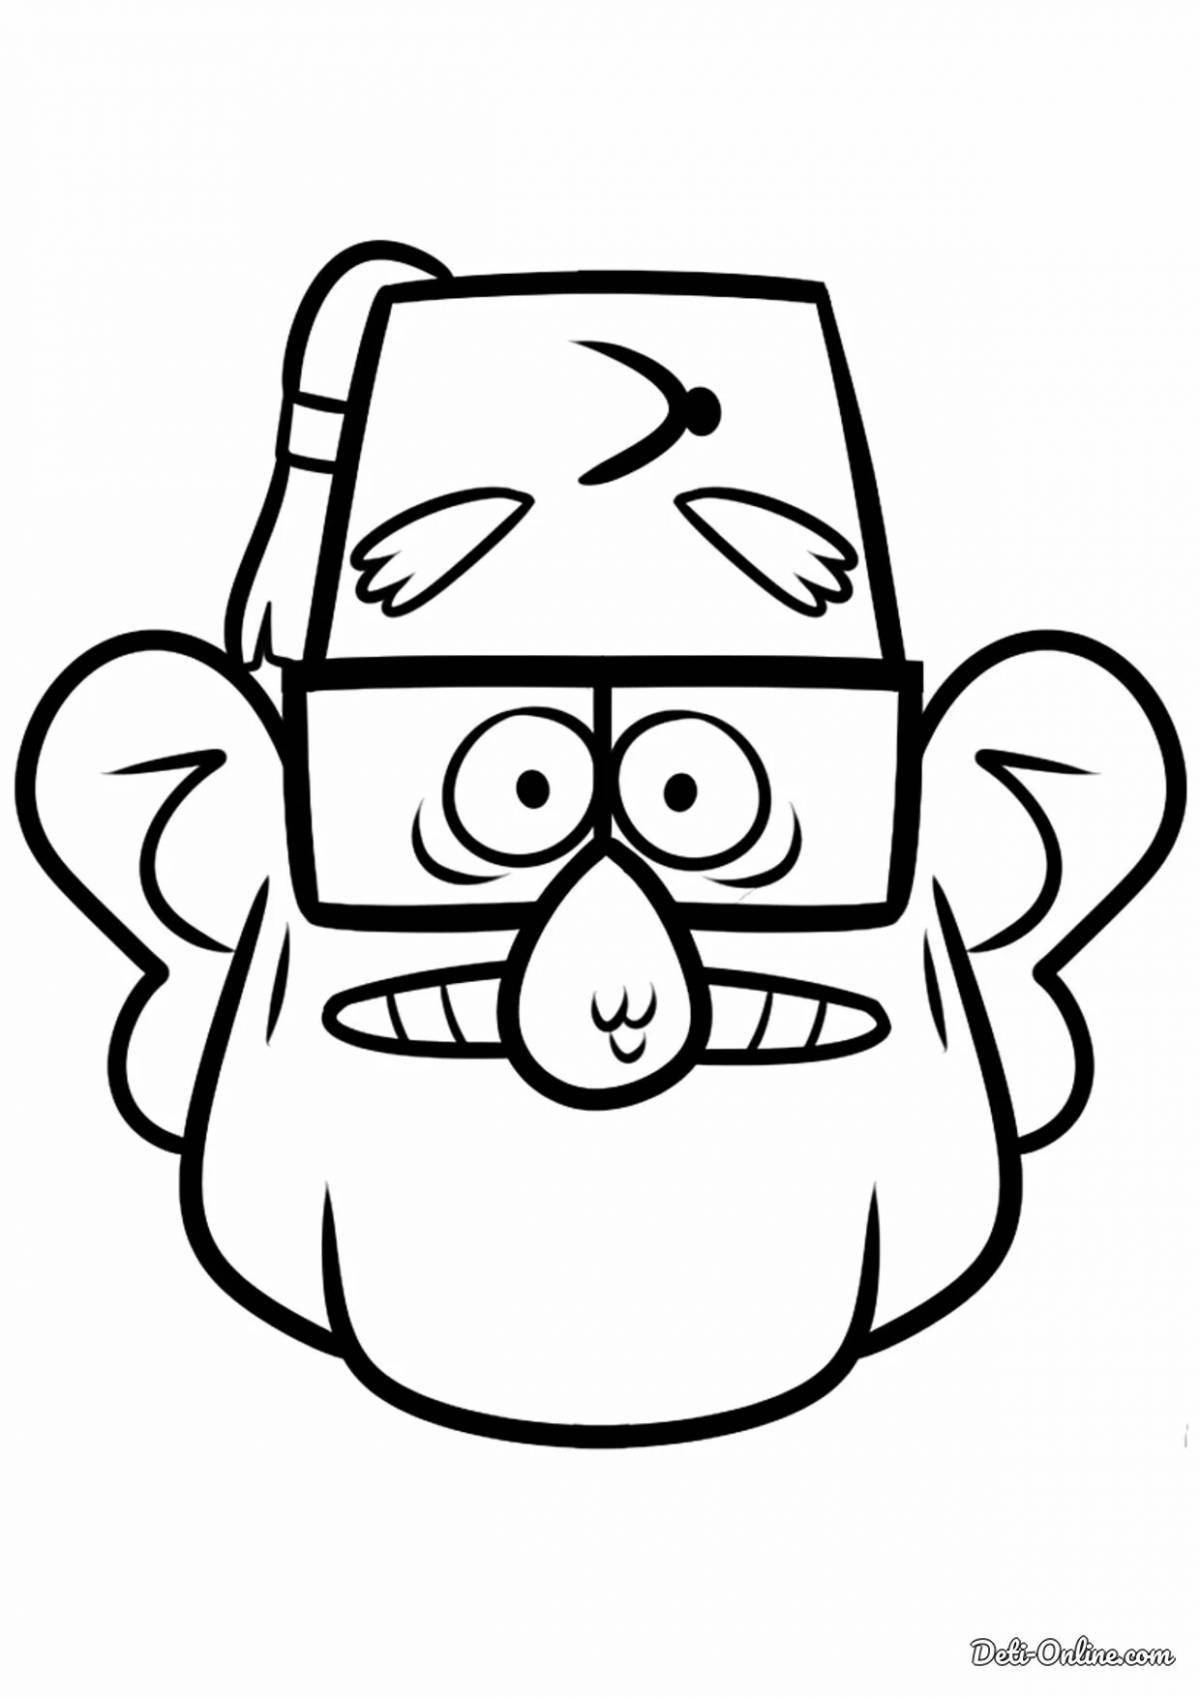 Coloring page funny gideon